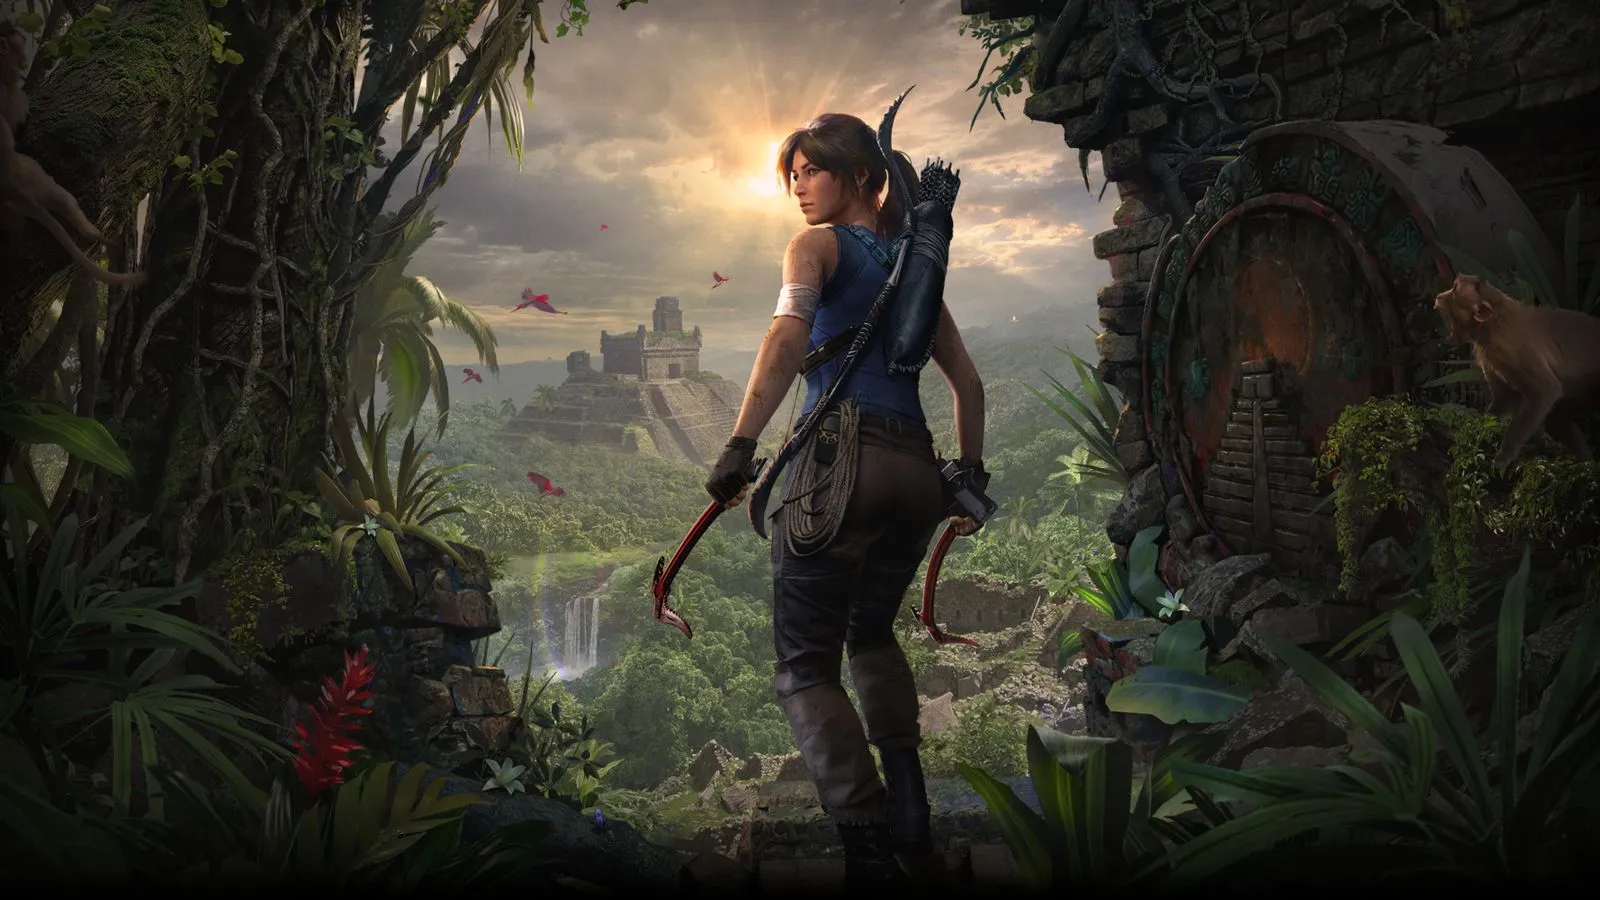 The Next Tomb Raider game will be made with the Unreal Engine 5?